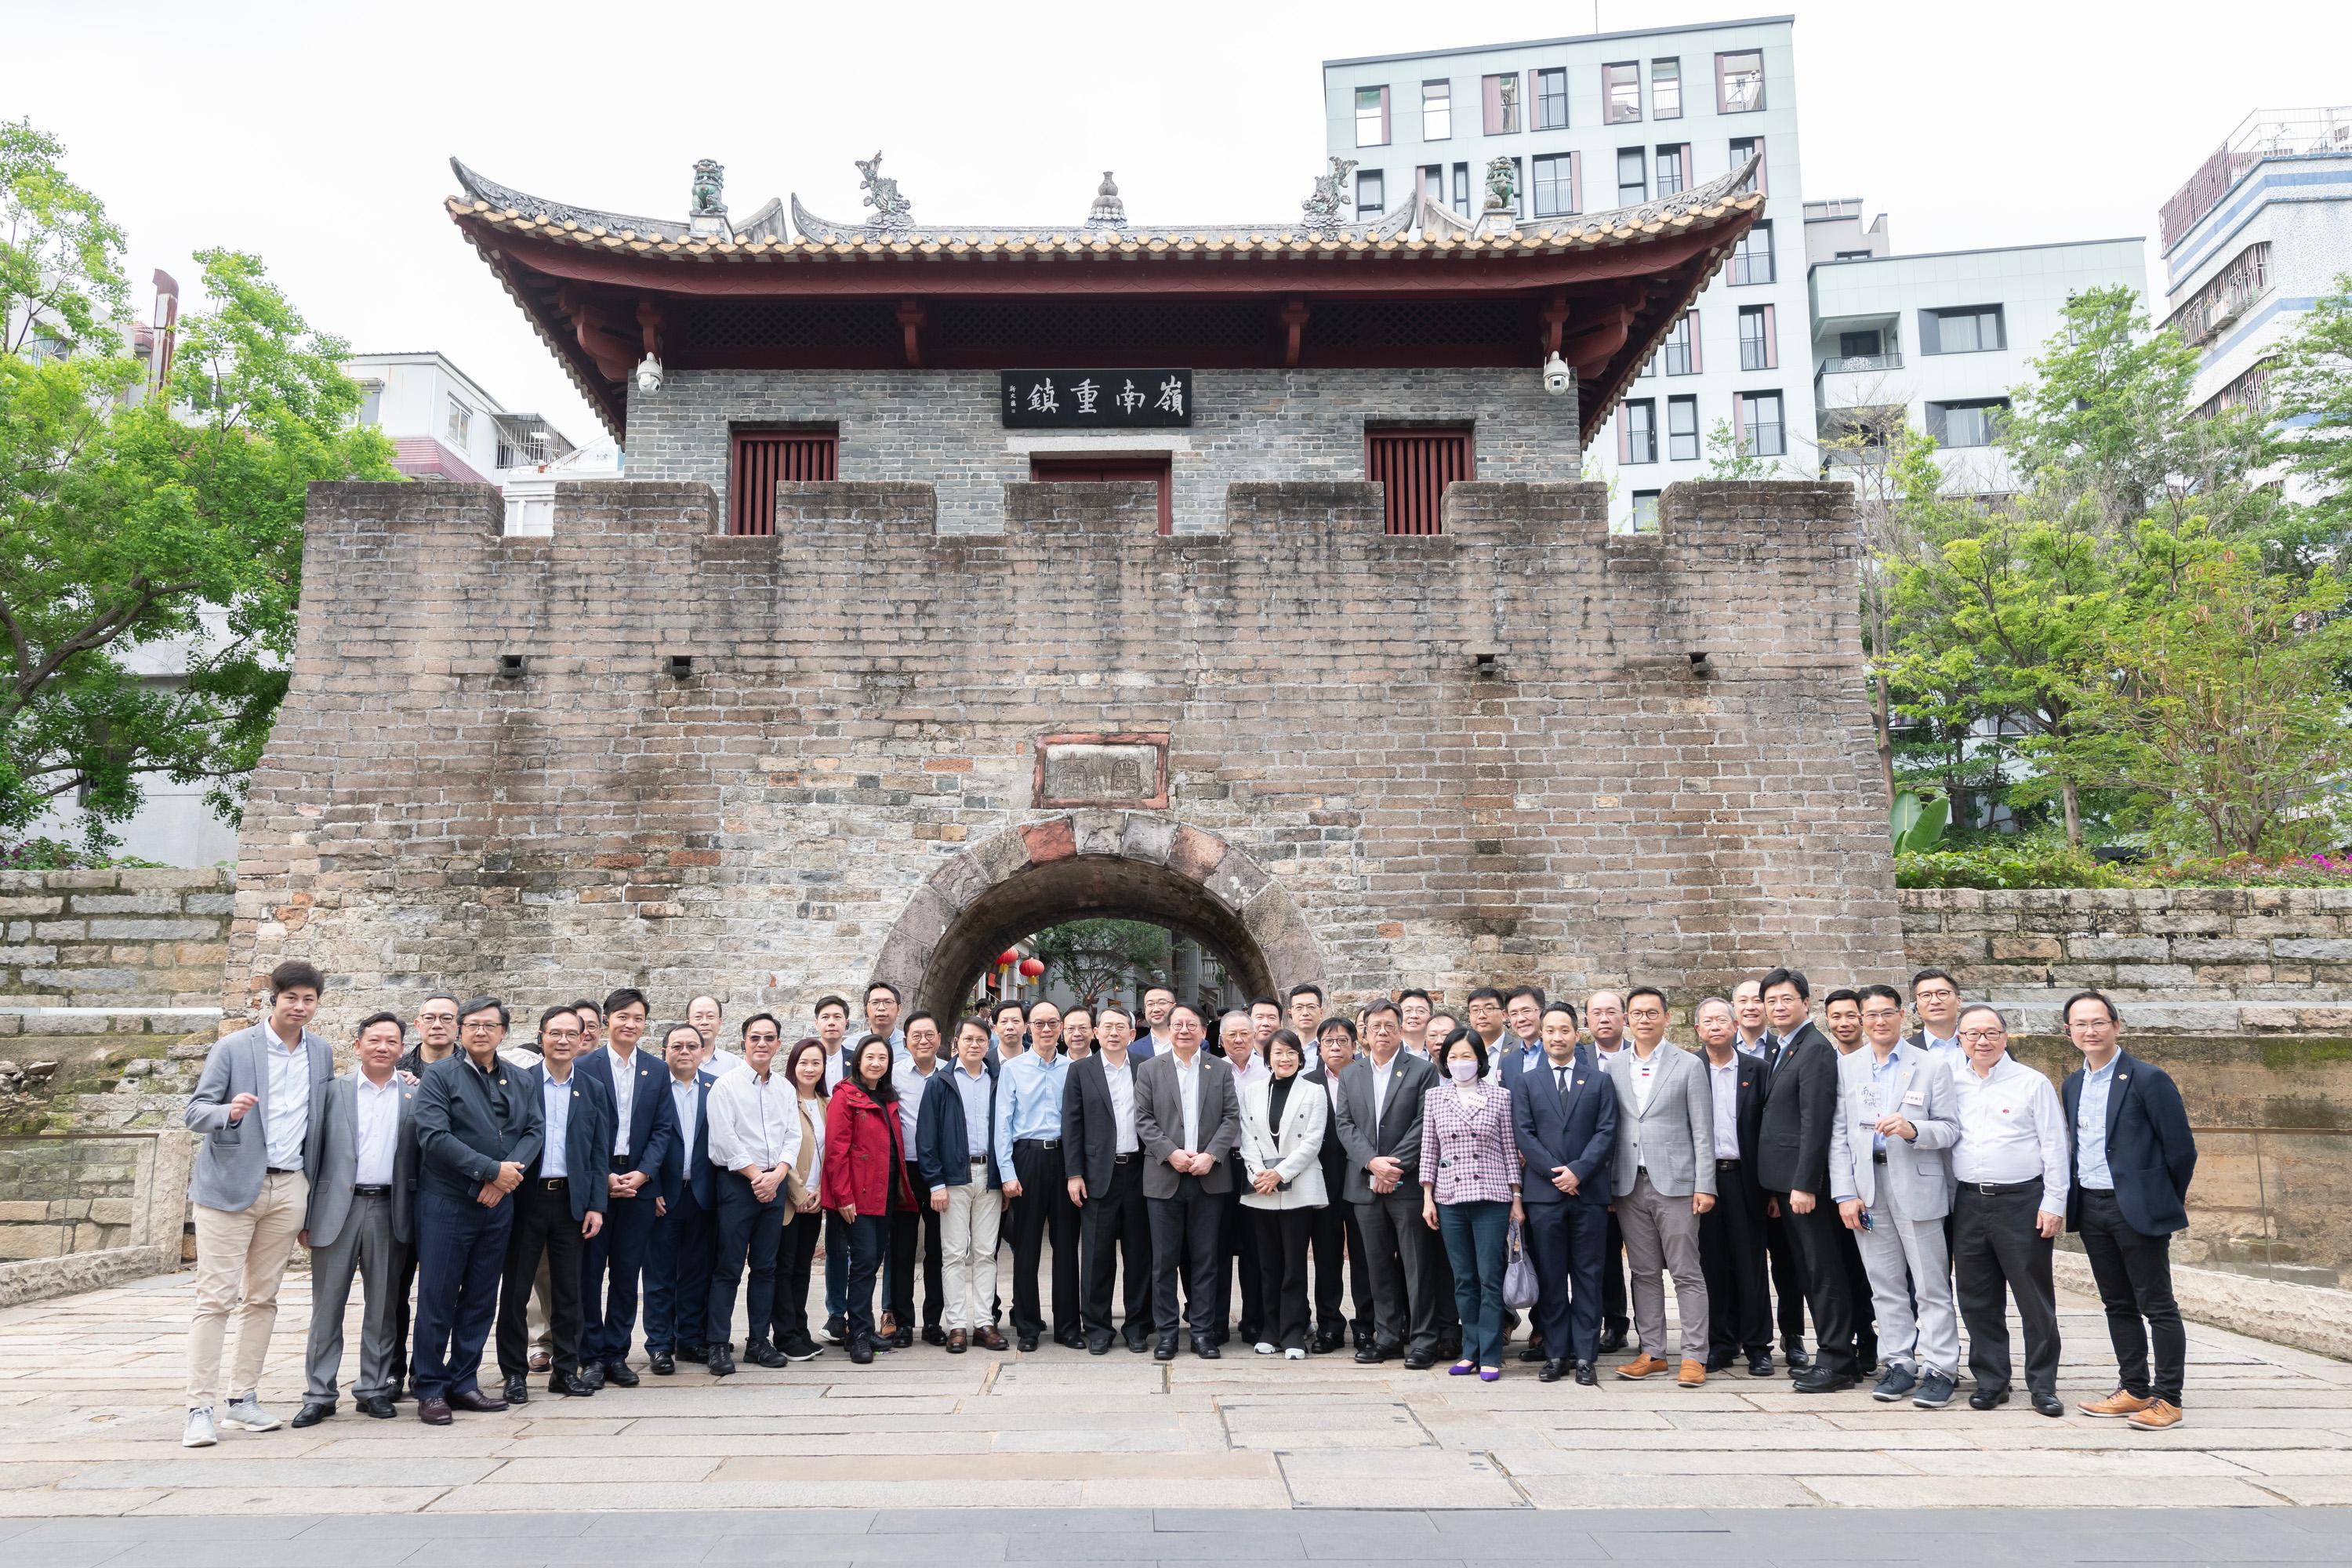 The delegation of the Hong Kong Special Administrative Region Government and the Legislative Council led by the Chief Executive, Mr John Lee, continues its duty visit in the Guangdong-Hong Kong-Macao Greater Bay Area today (April 22). The delegation visits Nantou Ancient Town.